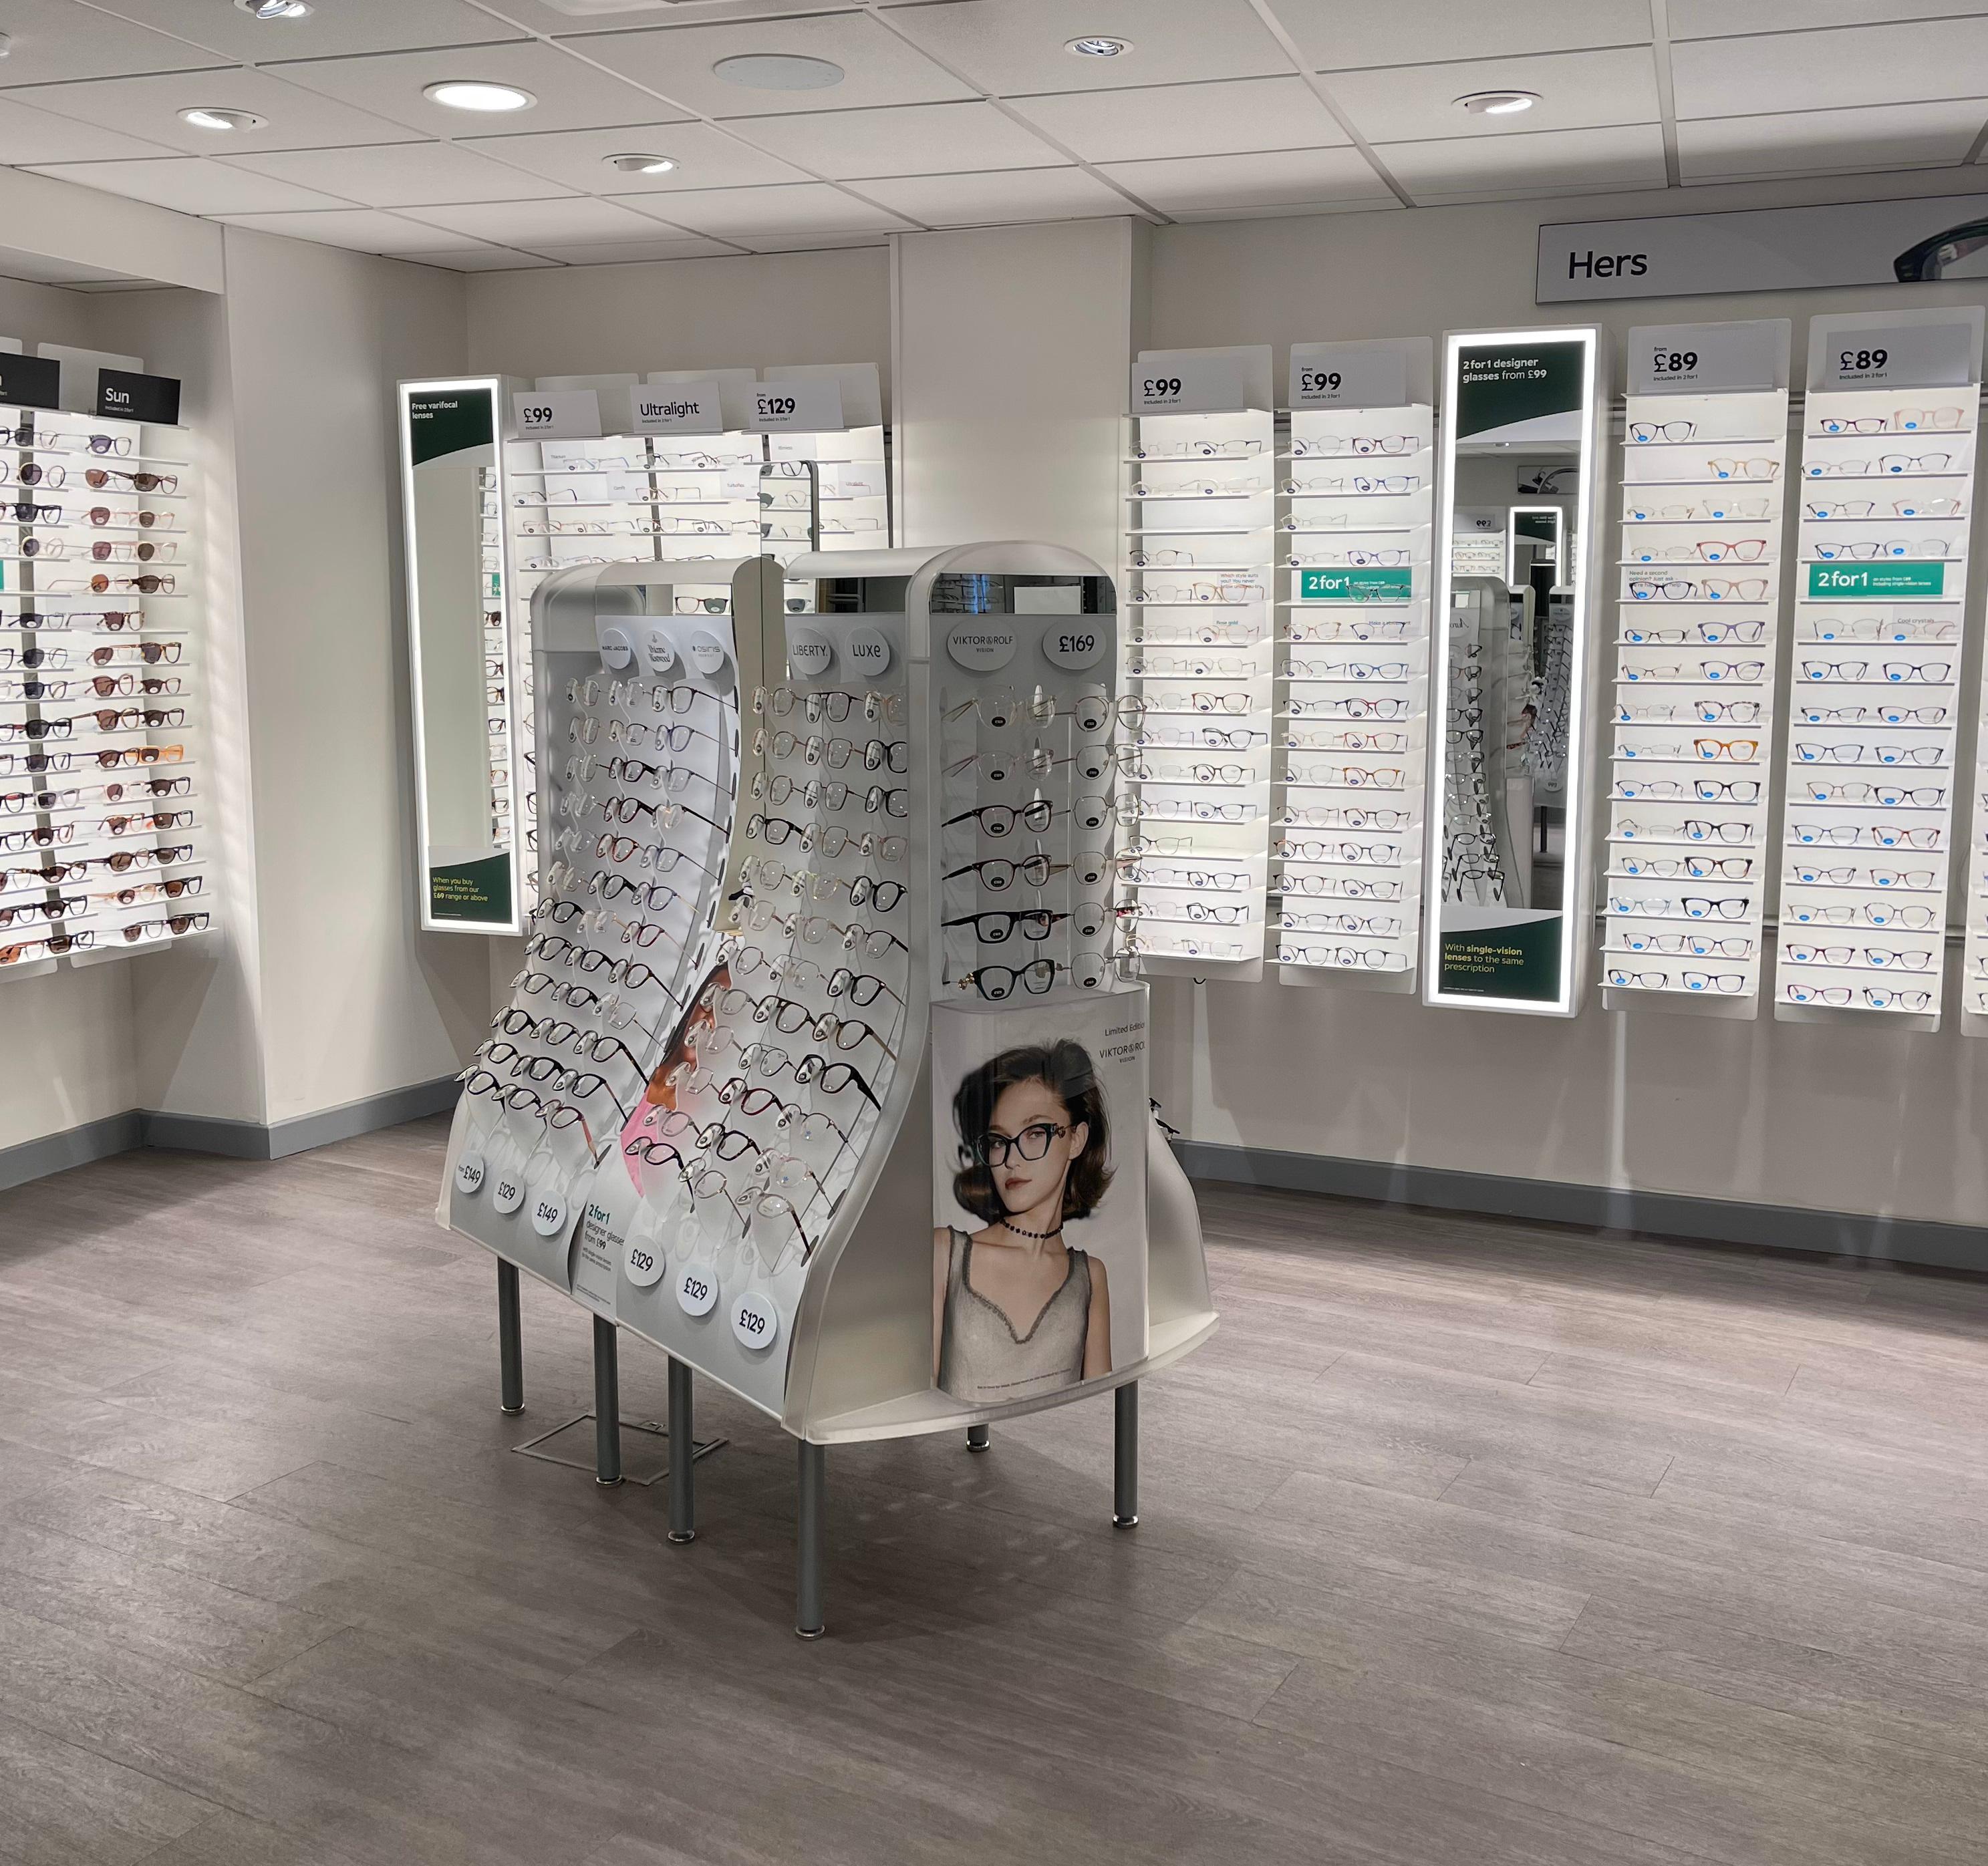 Specsavers Opticians and Audiologists - Melton Mowbray Specsavers Opticians and Audiologists - Melton Mowbray Melton Mowbray 01664 503555